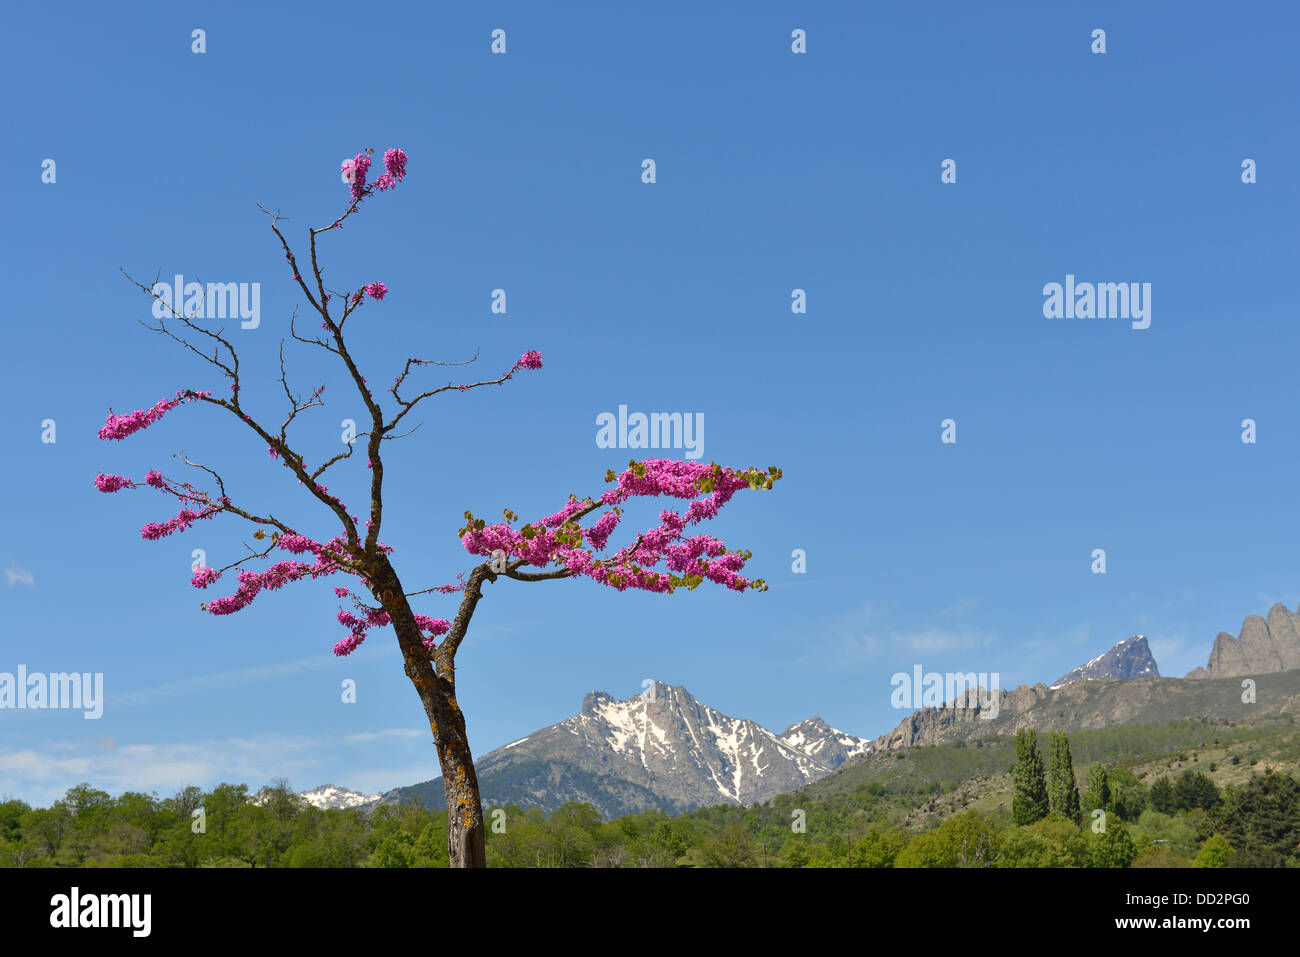 Tree in bloom with the Central Massif mountains in the background, Calacuccia, Niolo Valley, Corsica, France Stock Photo